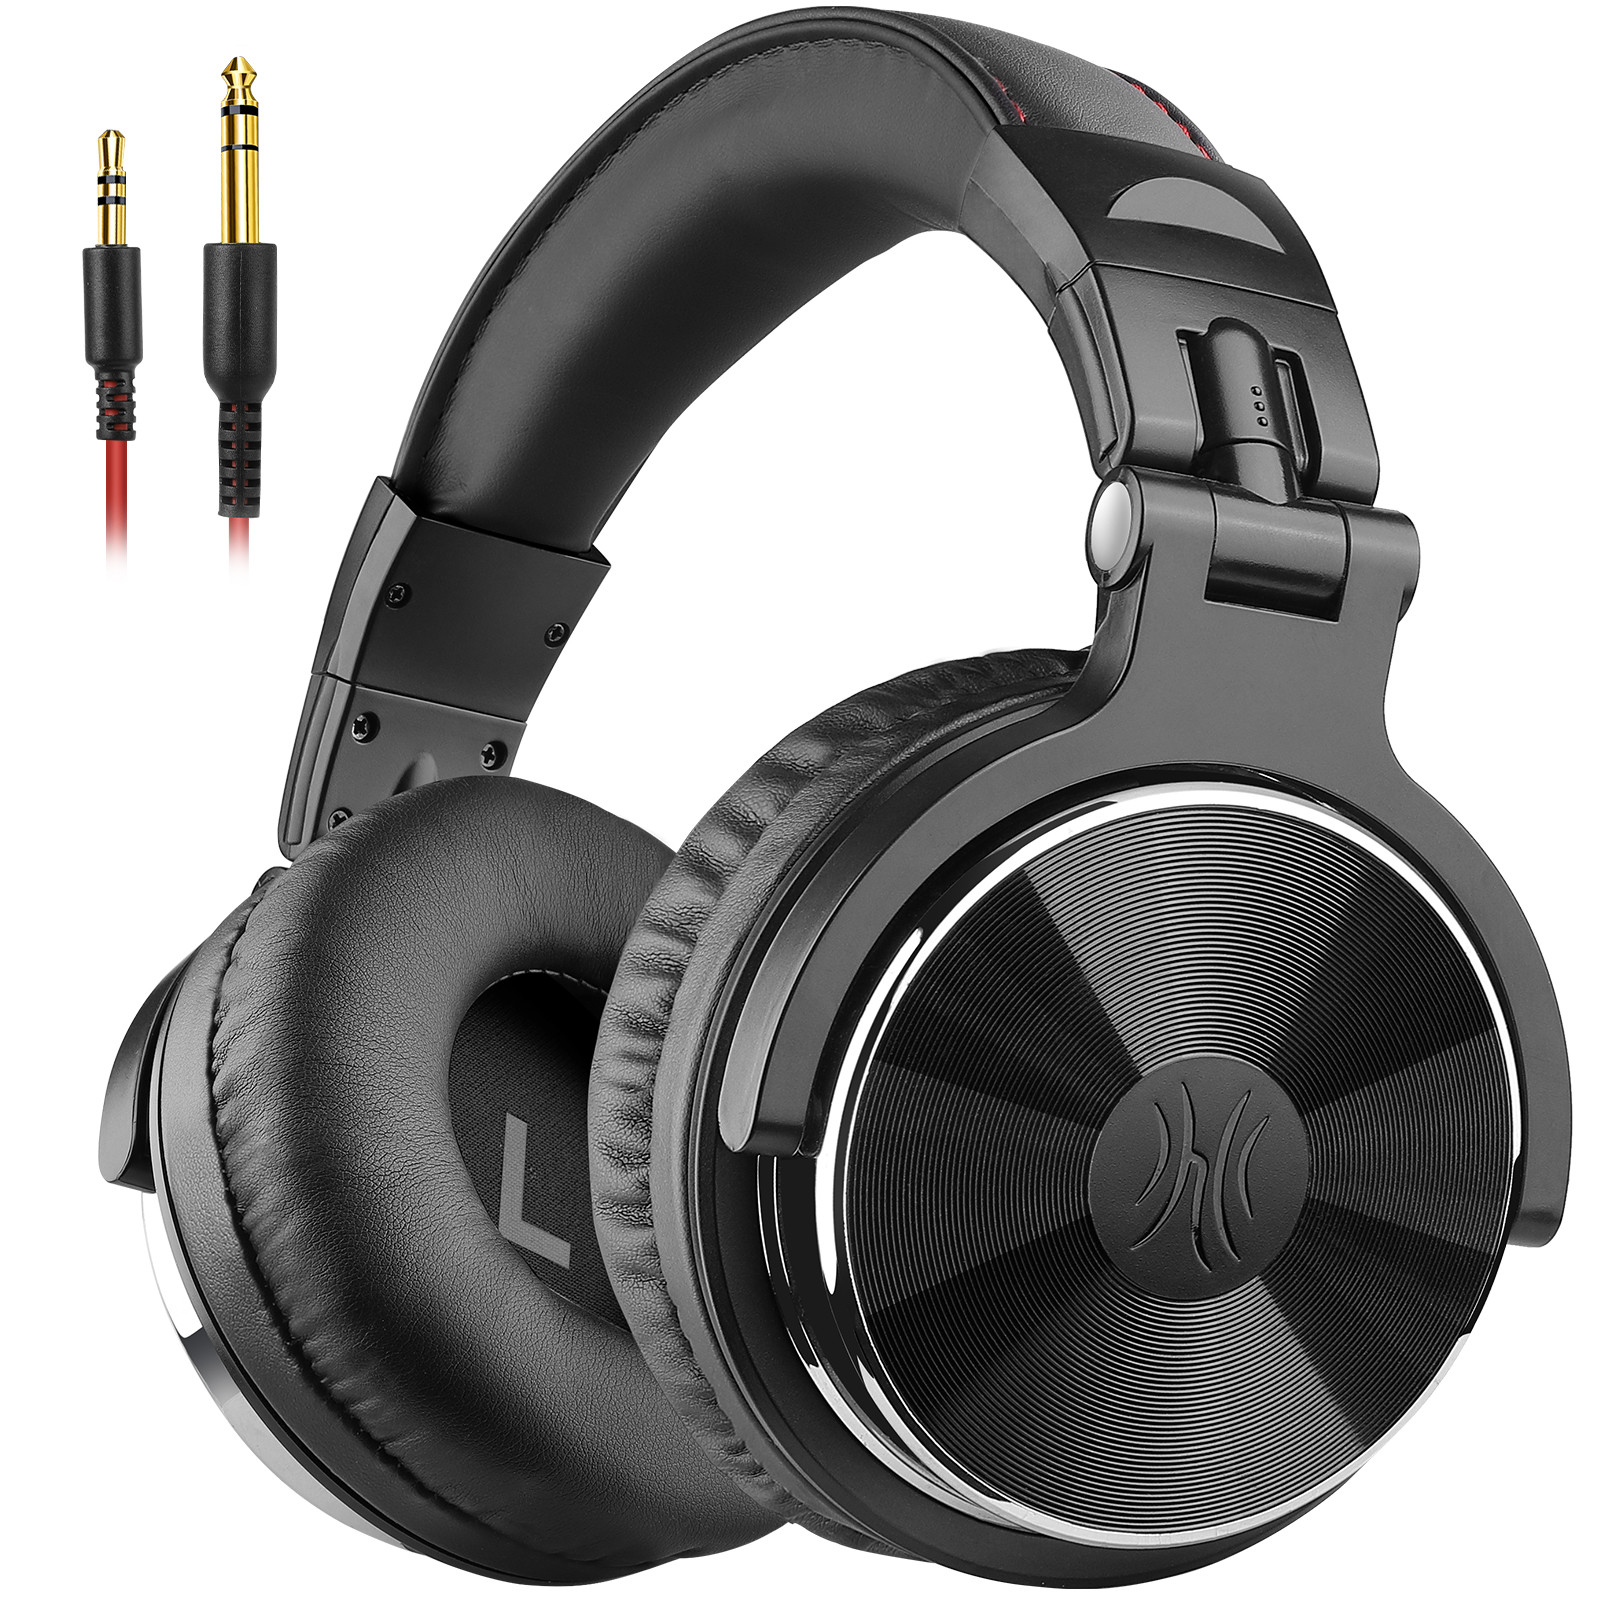 Over-ear Schwarz Headsets ONEODIO 10, Pro